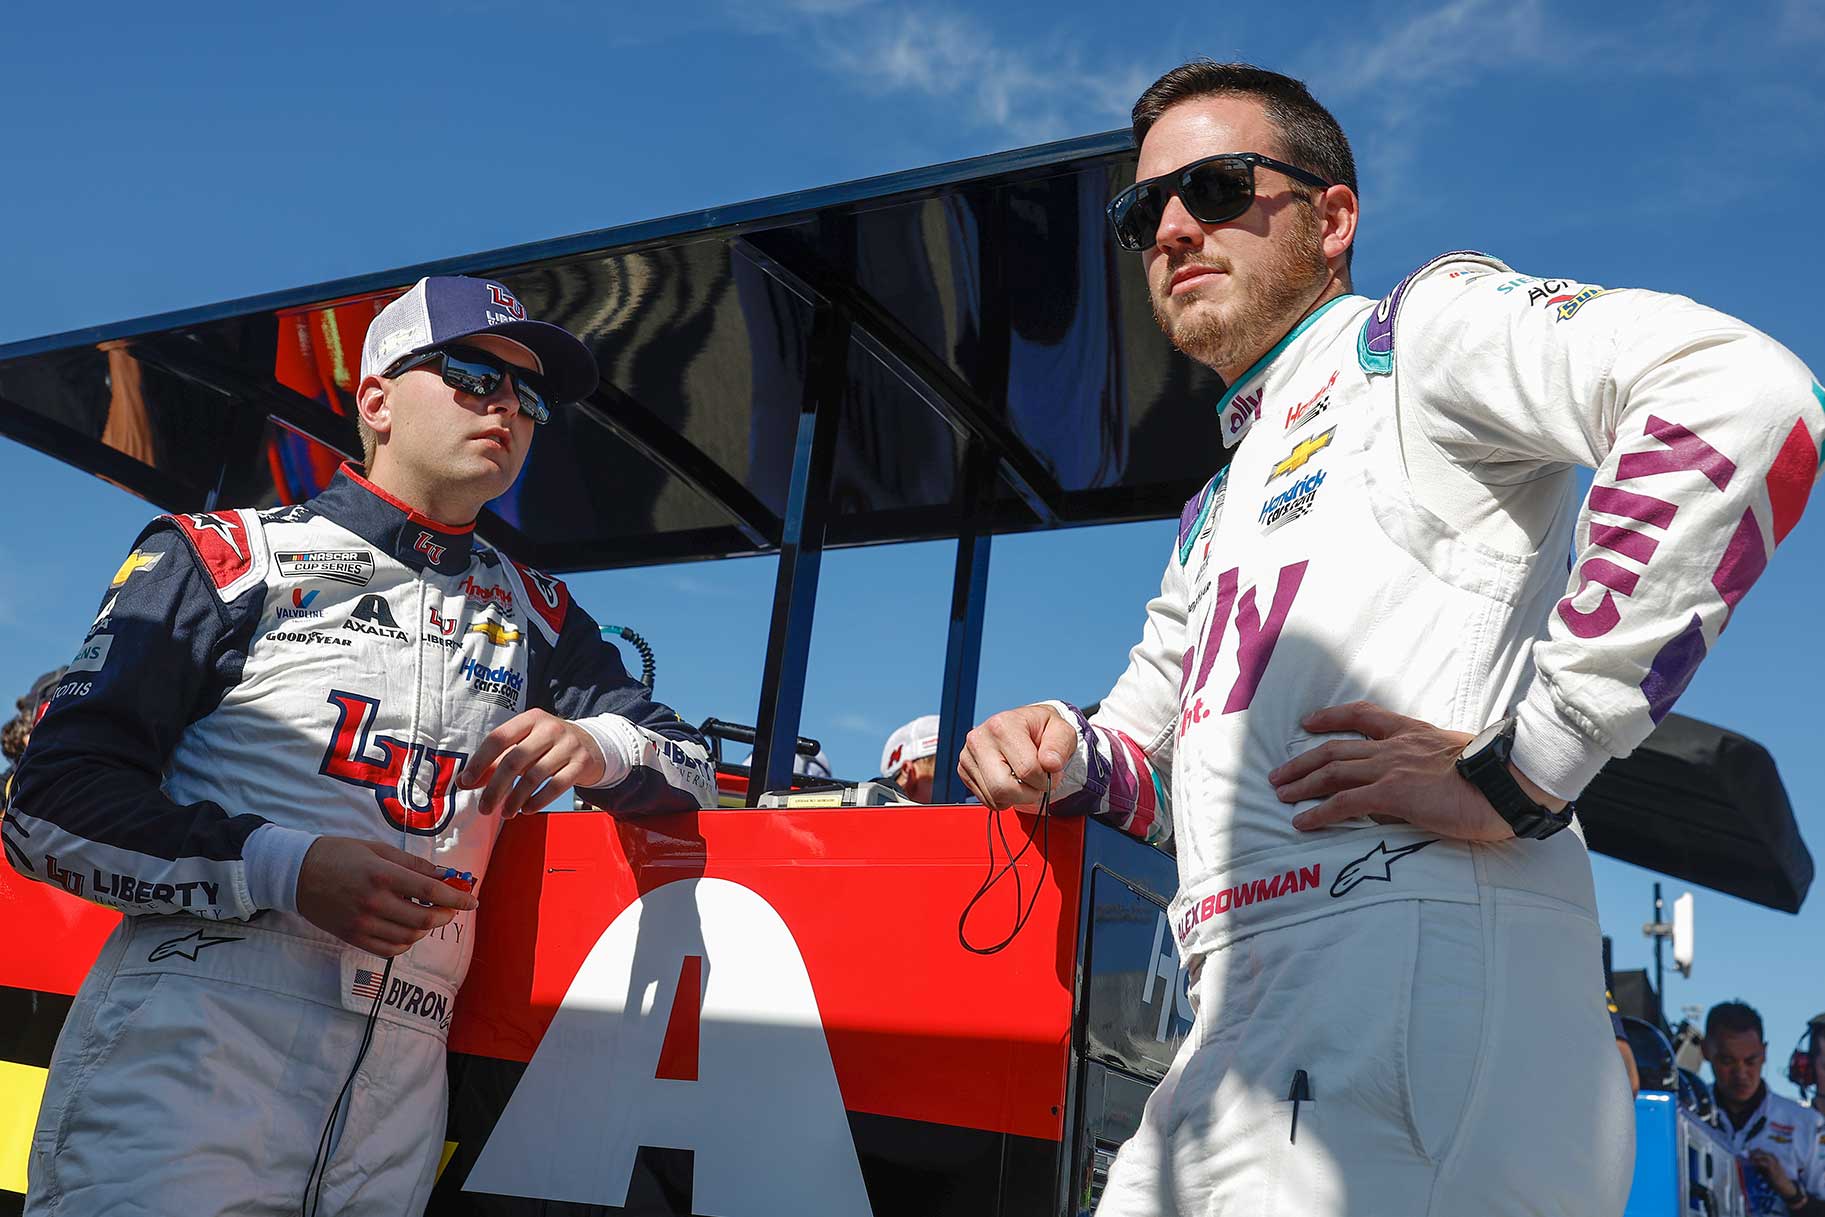 William Byron, driver of the #24 Liberty University Chevrolet, (L) and Alex Bowman, driver of the #48 Ally Chevrolet, talk in the garage area during practice for the NASCAR Cup Series Federated Auto Parts 400